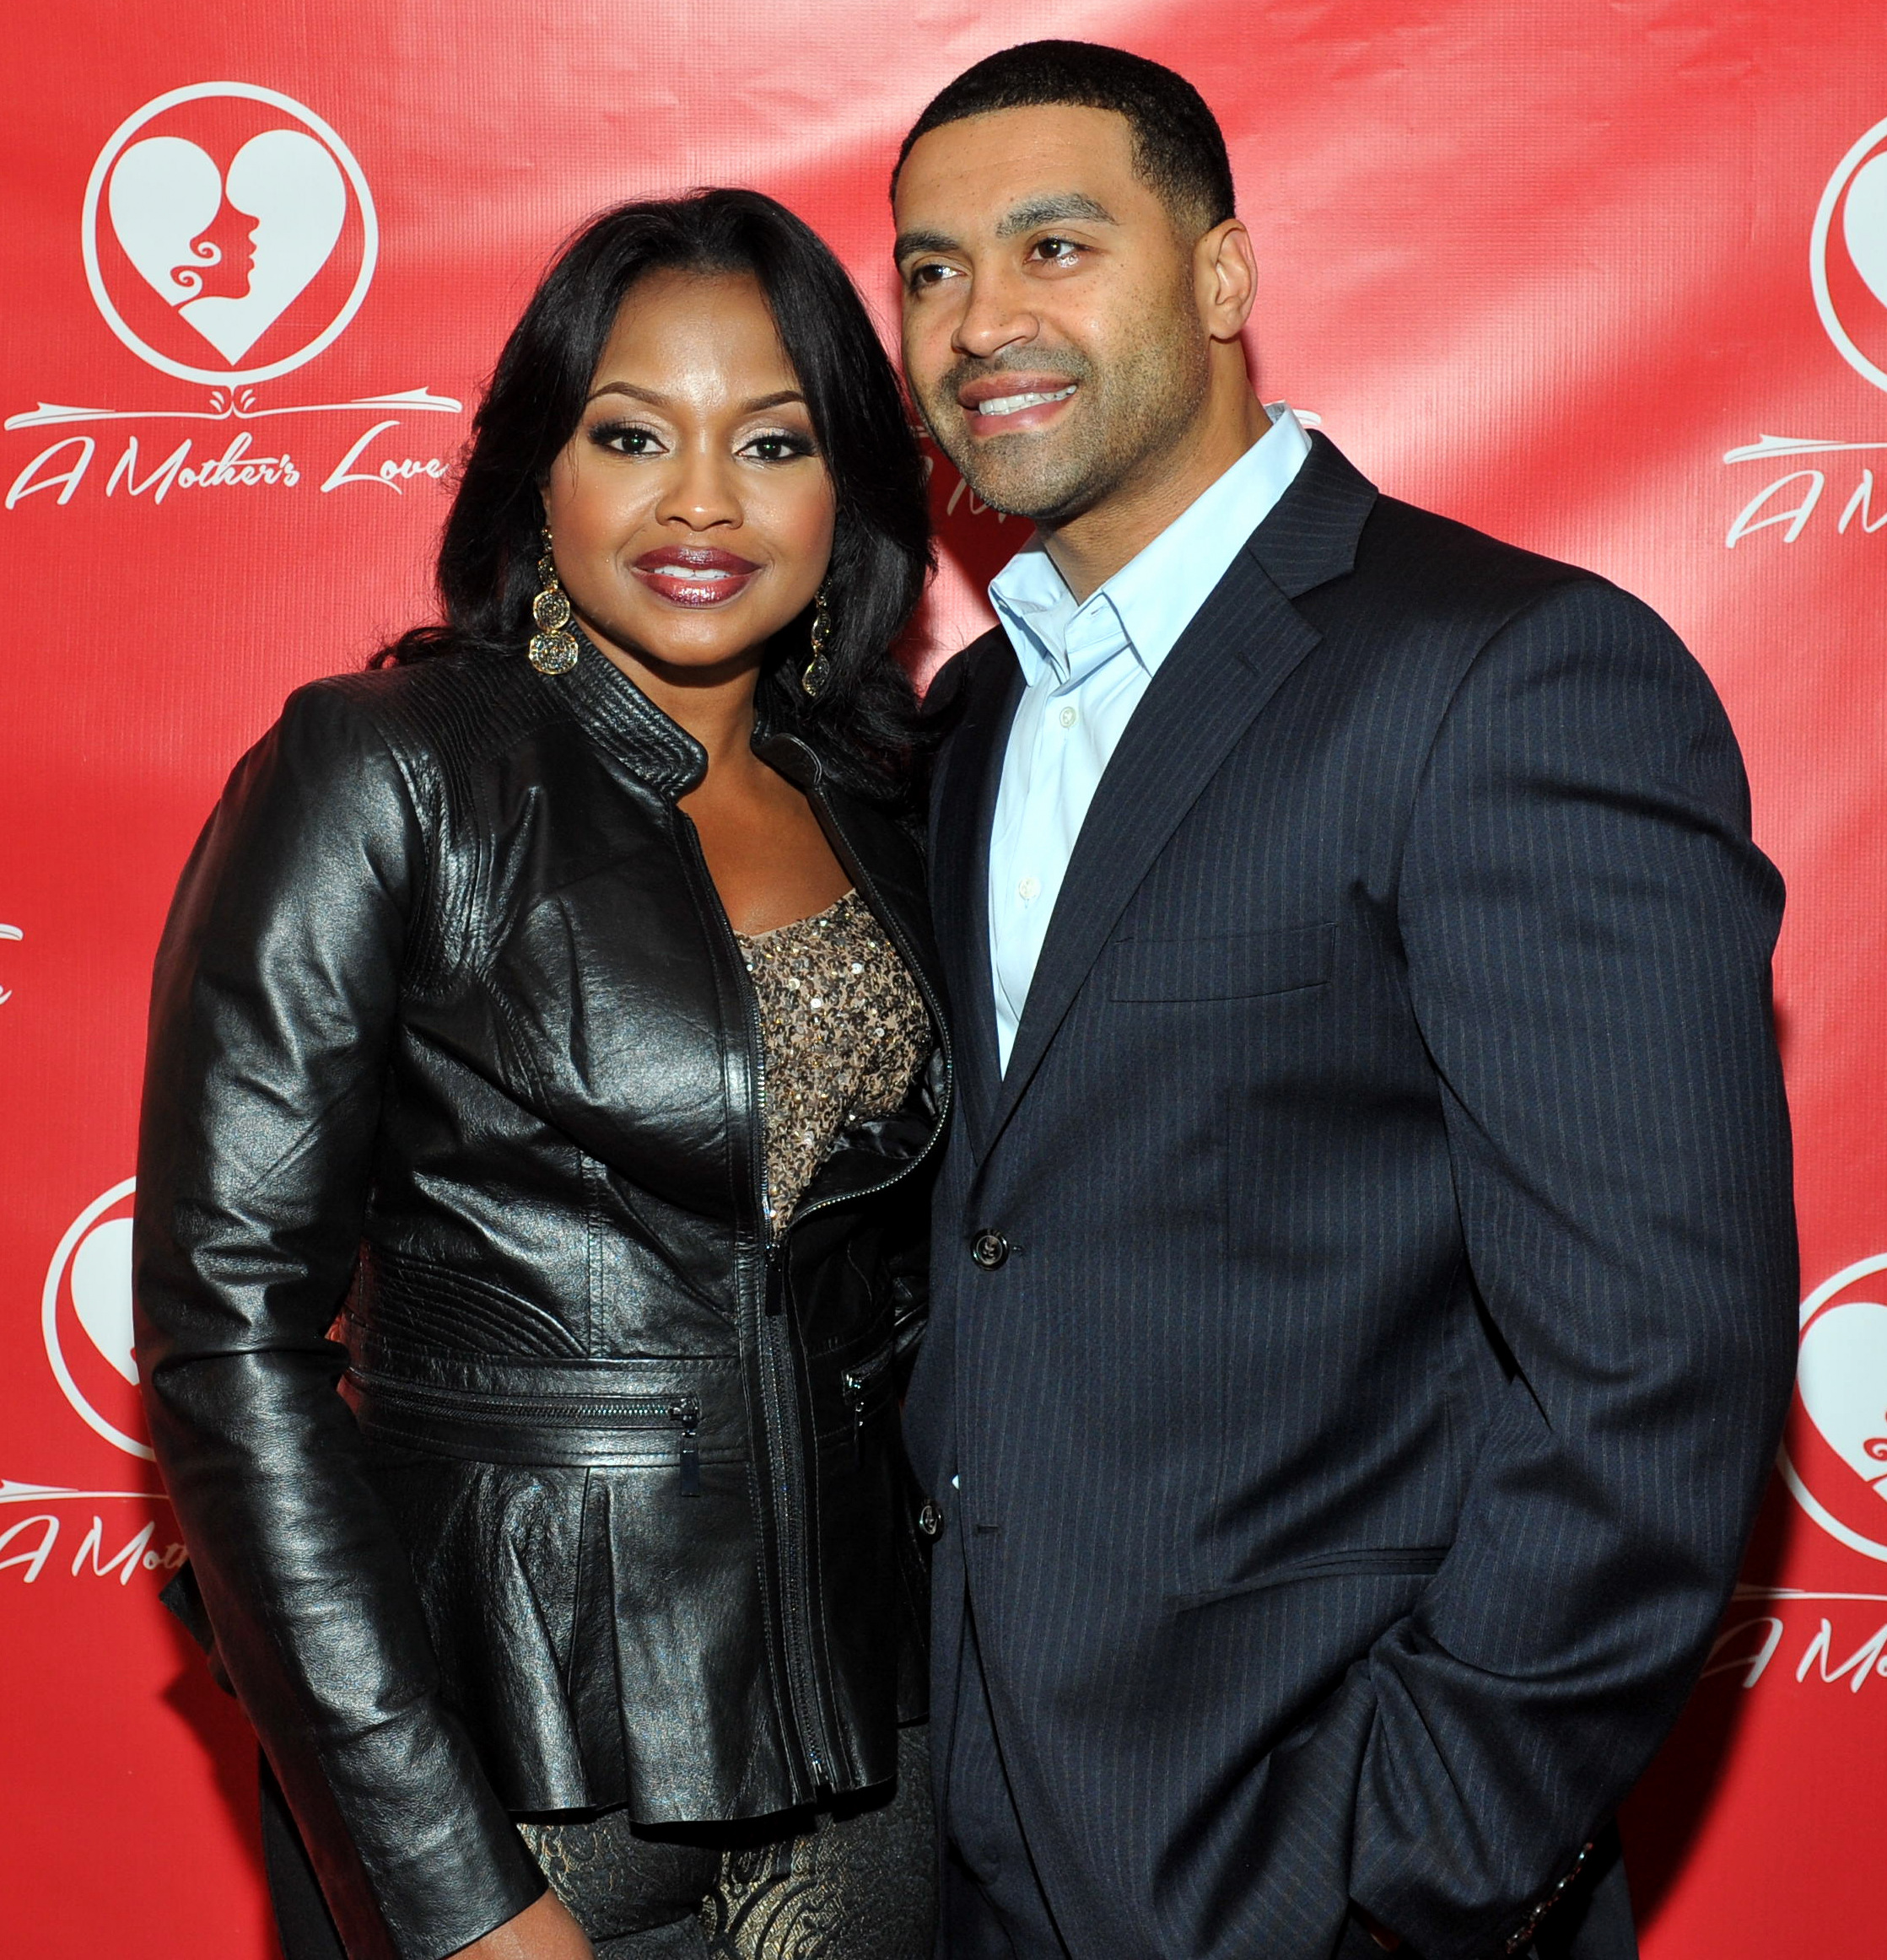 <p>During an interview with <a href="https://www.dailymail.co.uk/news/article-7230021/Phaedra-Parks-reveals-shes-moved-convict-ex-husband-dating-decade-younger-actor.html">DailyMailTV</a> that hit the Internet in July 2019, former "The Real Housewives of Atlanta" star Phaedra Parks revealed how she and <a href="https://www.wonderwall.com/news/former-housewives-star-phaedra-parks-finally-officially-divorced-jailed-husband-3007909.article">her ex-husband</a>, Apollo Nida, first met back in 1995: He saw her driving on an Atlanta highway and flagged her down. "He saw me, flagged me down, we met and he followed me home and walked up to my doorstep and said, 'Hey, I want you to be my girlfriend,'" she recalled, adding that at the time, her ex "was extremely nice, always very generous, just a really good guy." Phaedra met a later love, "The Haves and the Have Nots" actor Medina Islam, <a href="https://www.wonderwall.com/celebrity/couples/nikki-bella-artem-chigvintsev-official-boyfriend-celeb-love-life-news-mid-july-2019-hollywood-romance-report-3020391.gallery?photoId=1059064">on Raya</a>, an exclusive dating app for the rich and famous.</p>